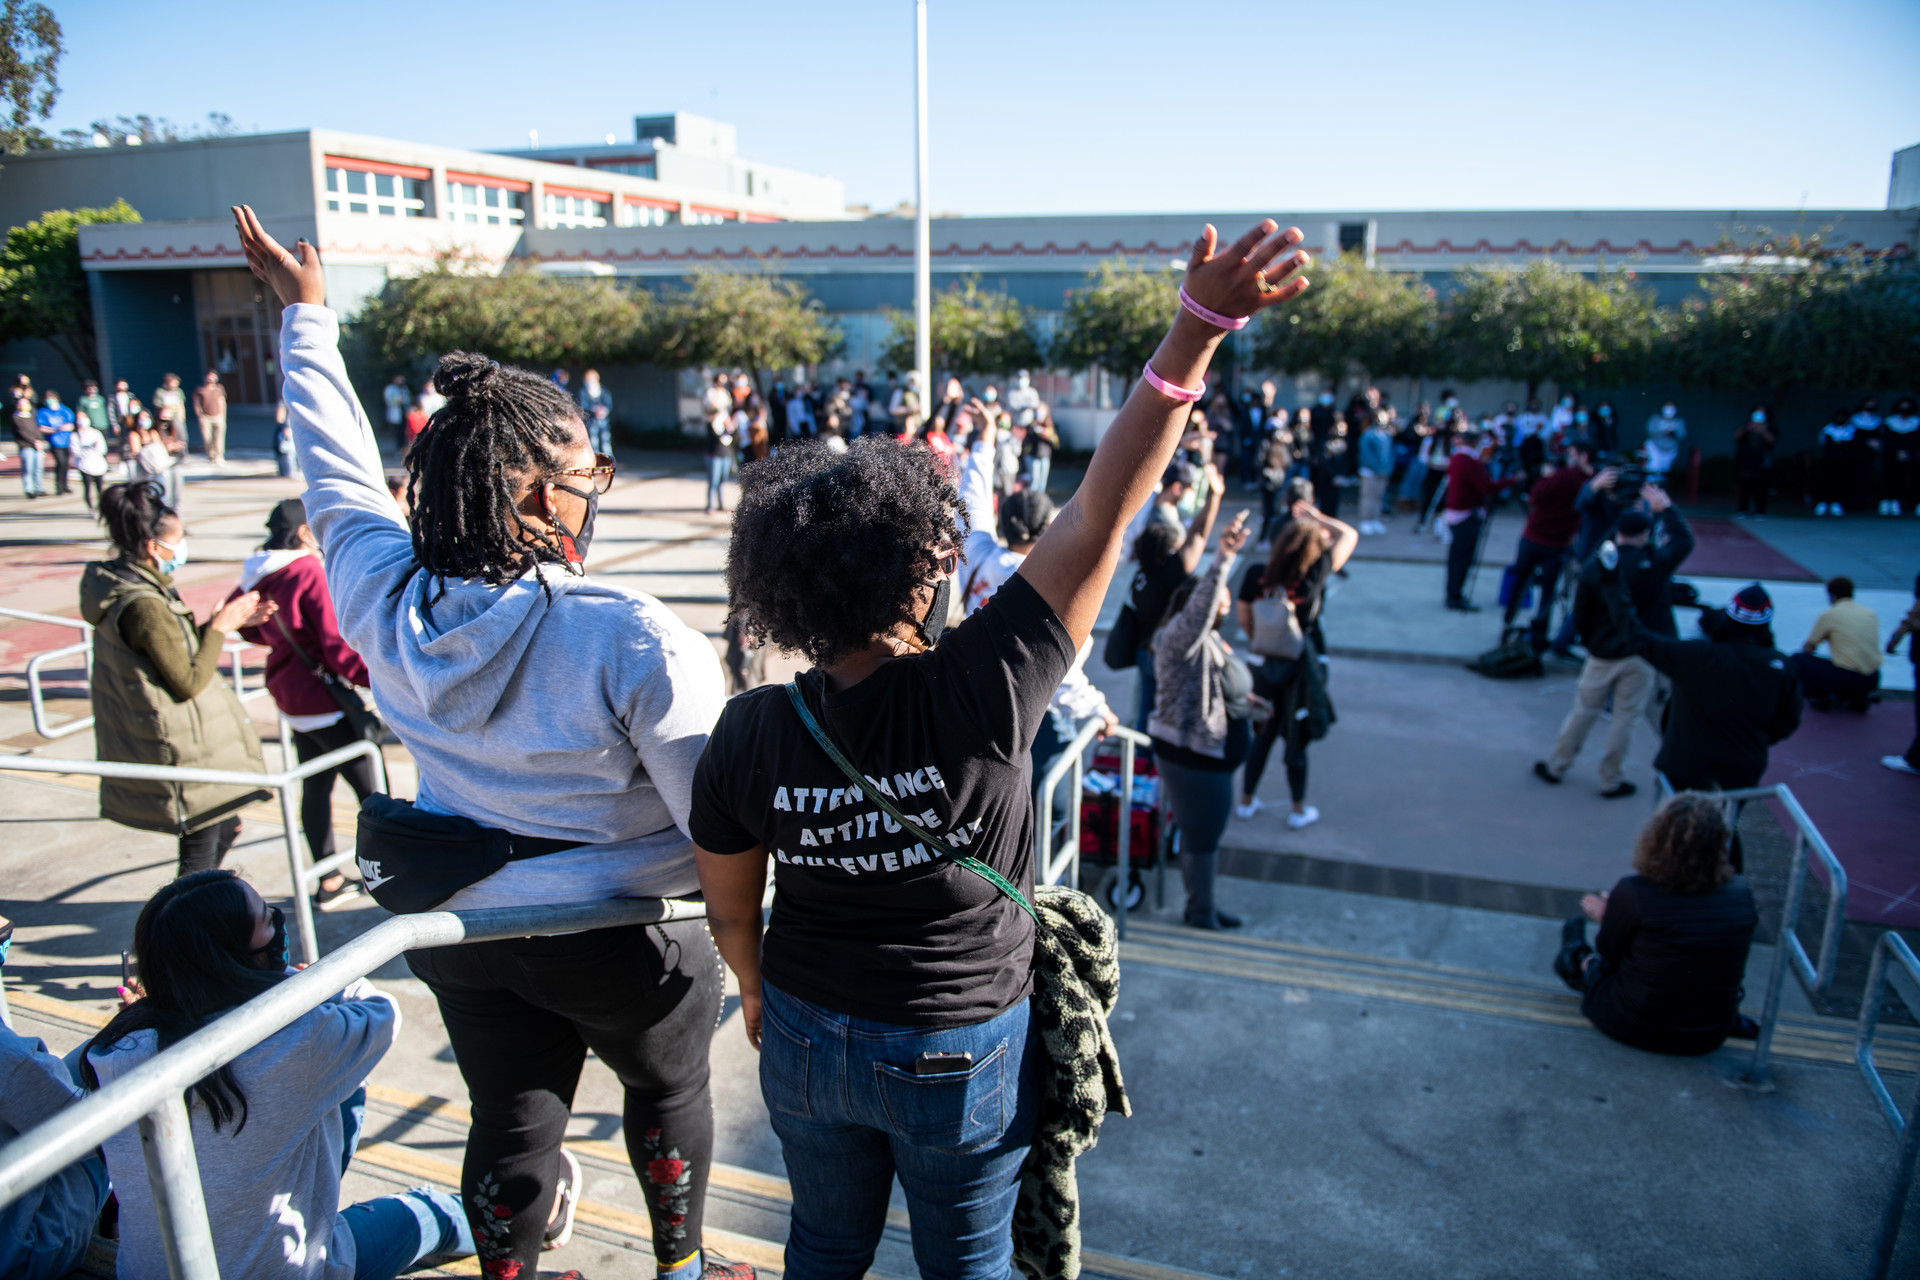 Two students stand outdoors on a cement staircase with their backs to the camera and their hands raised in the air amid a crowd of other students and educators protesting at a high school campus.